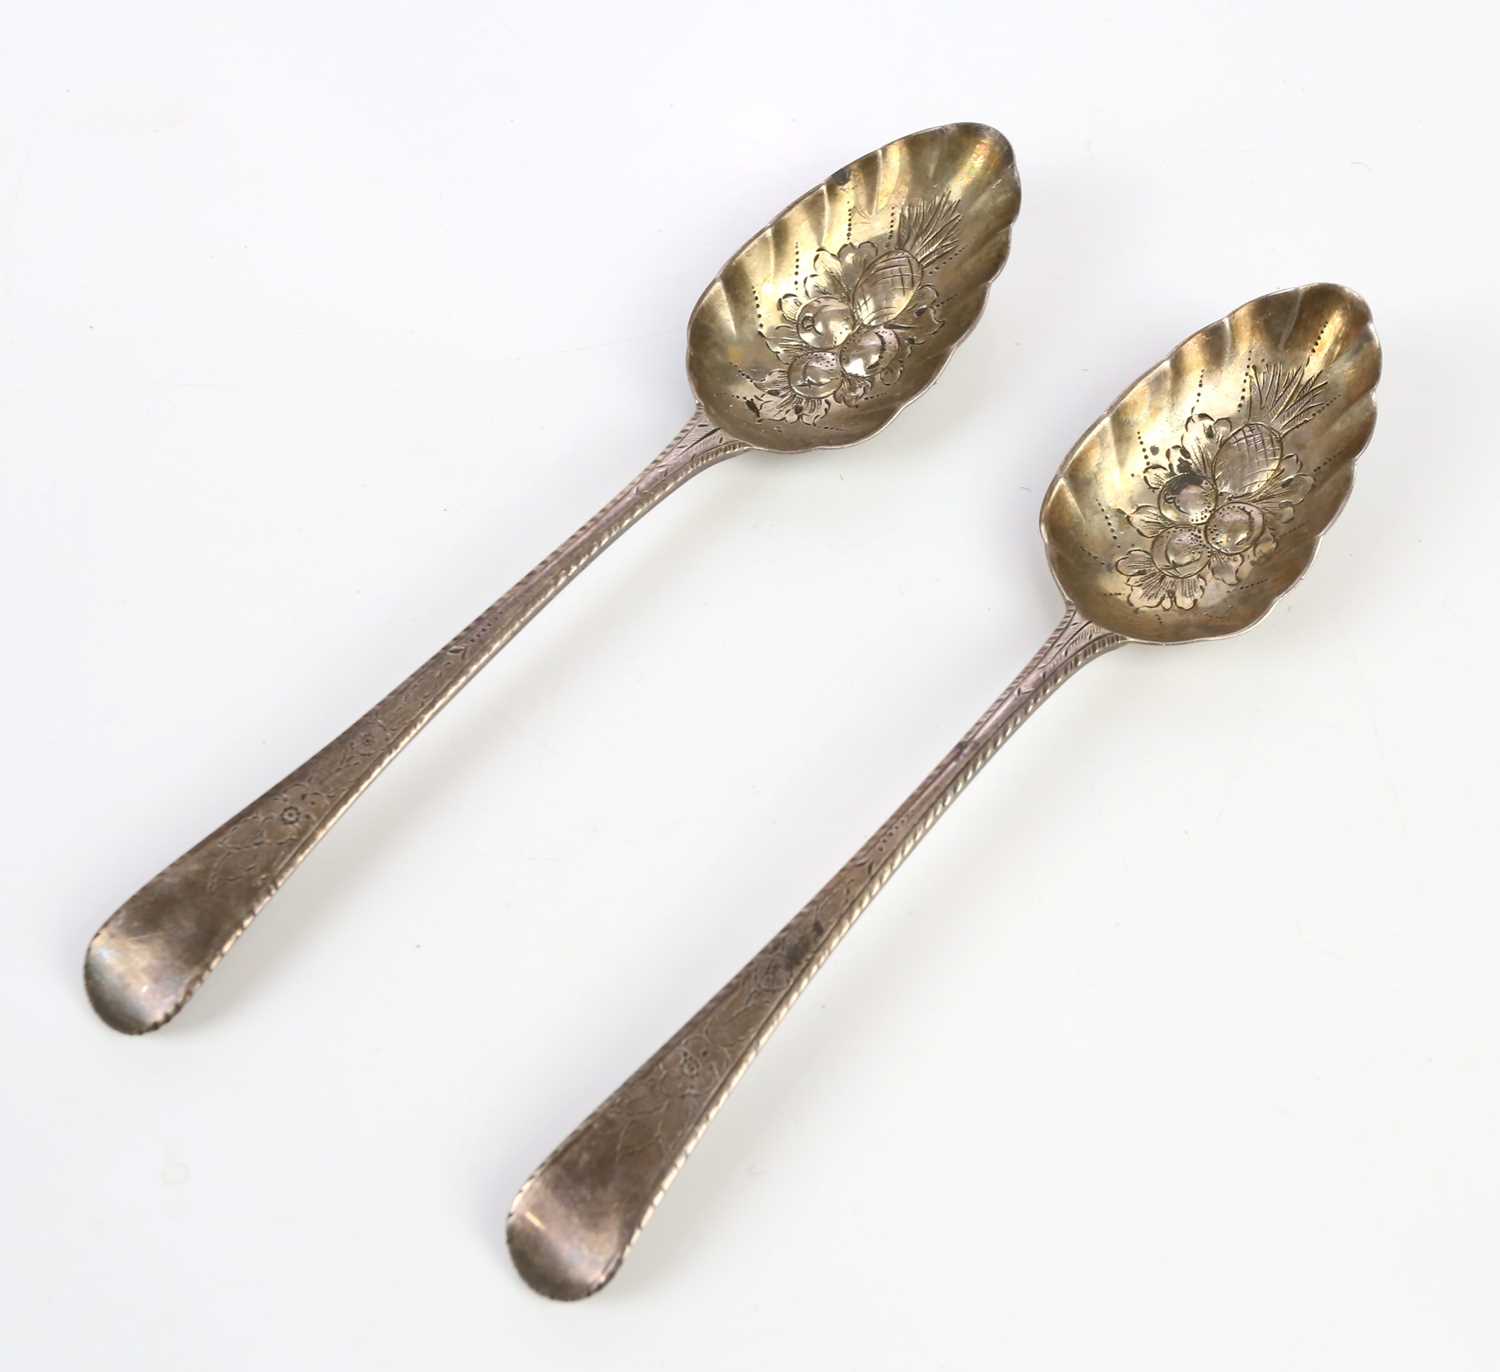 GEORGE SMITH & WILLIAM FEARN; a pair of hallmarked silver Georgian berry spoons, London 1794,